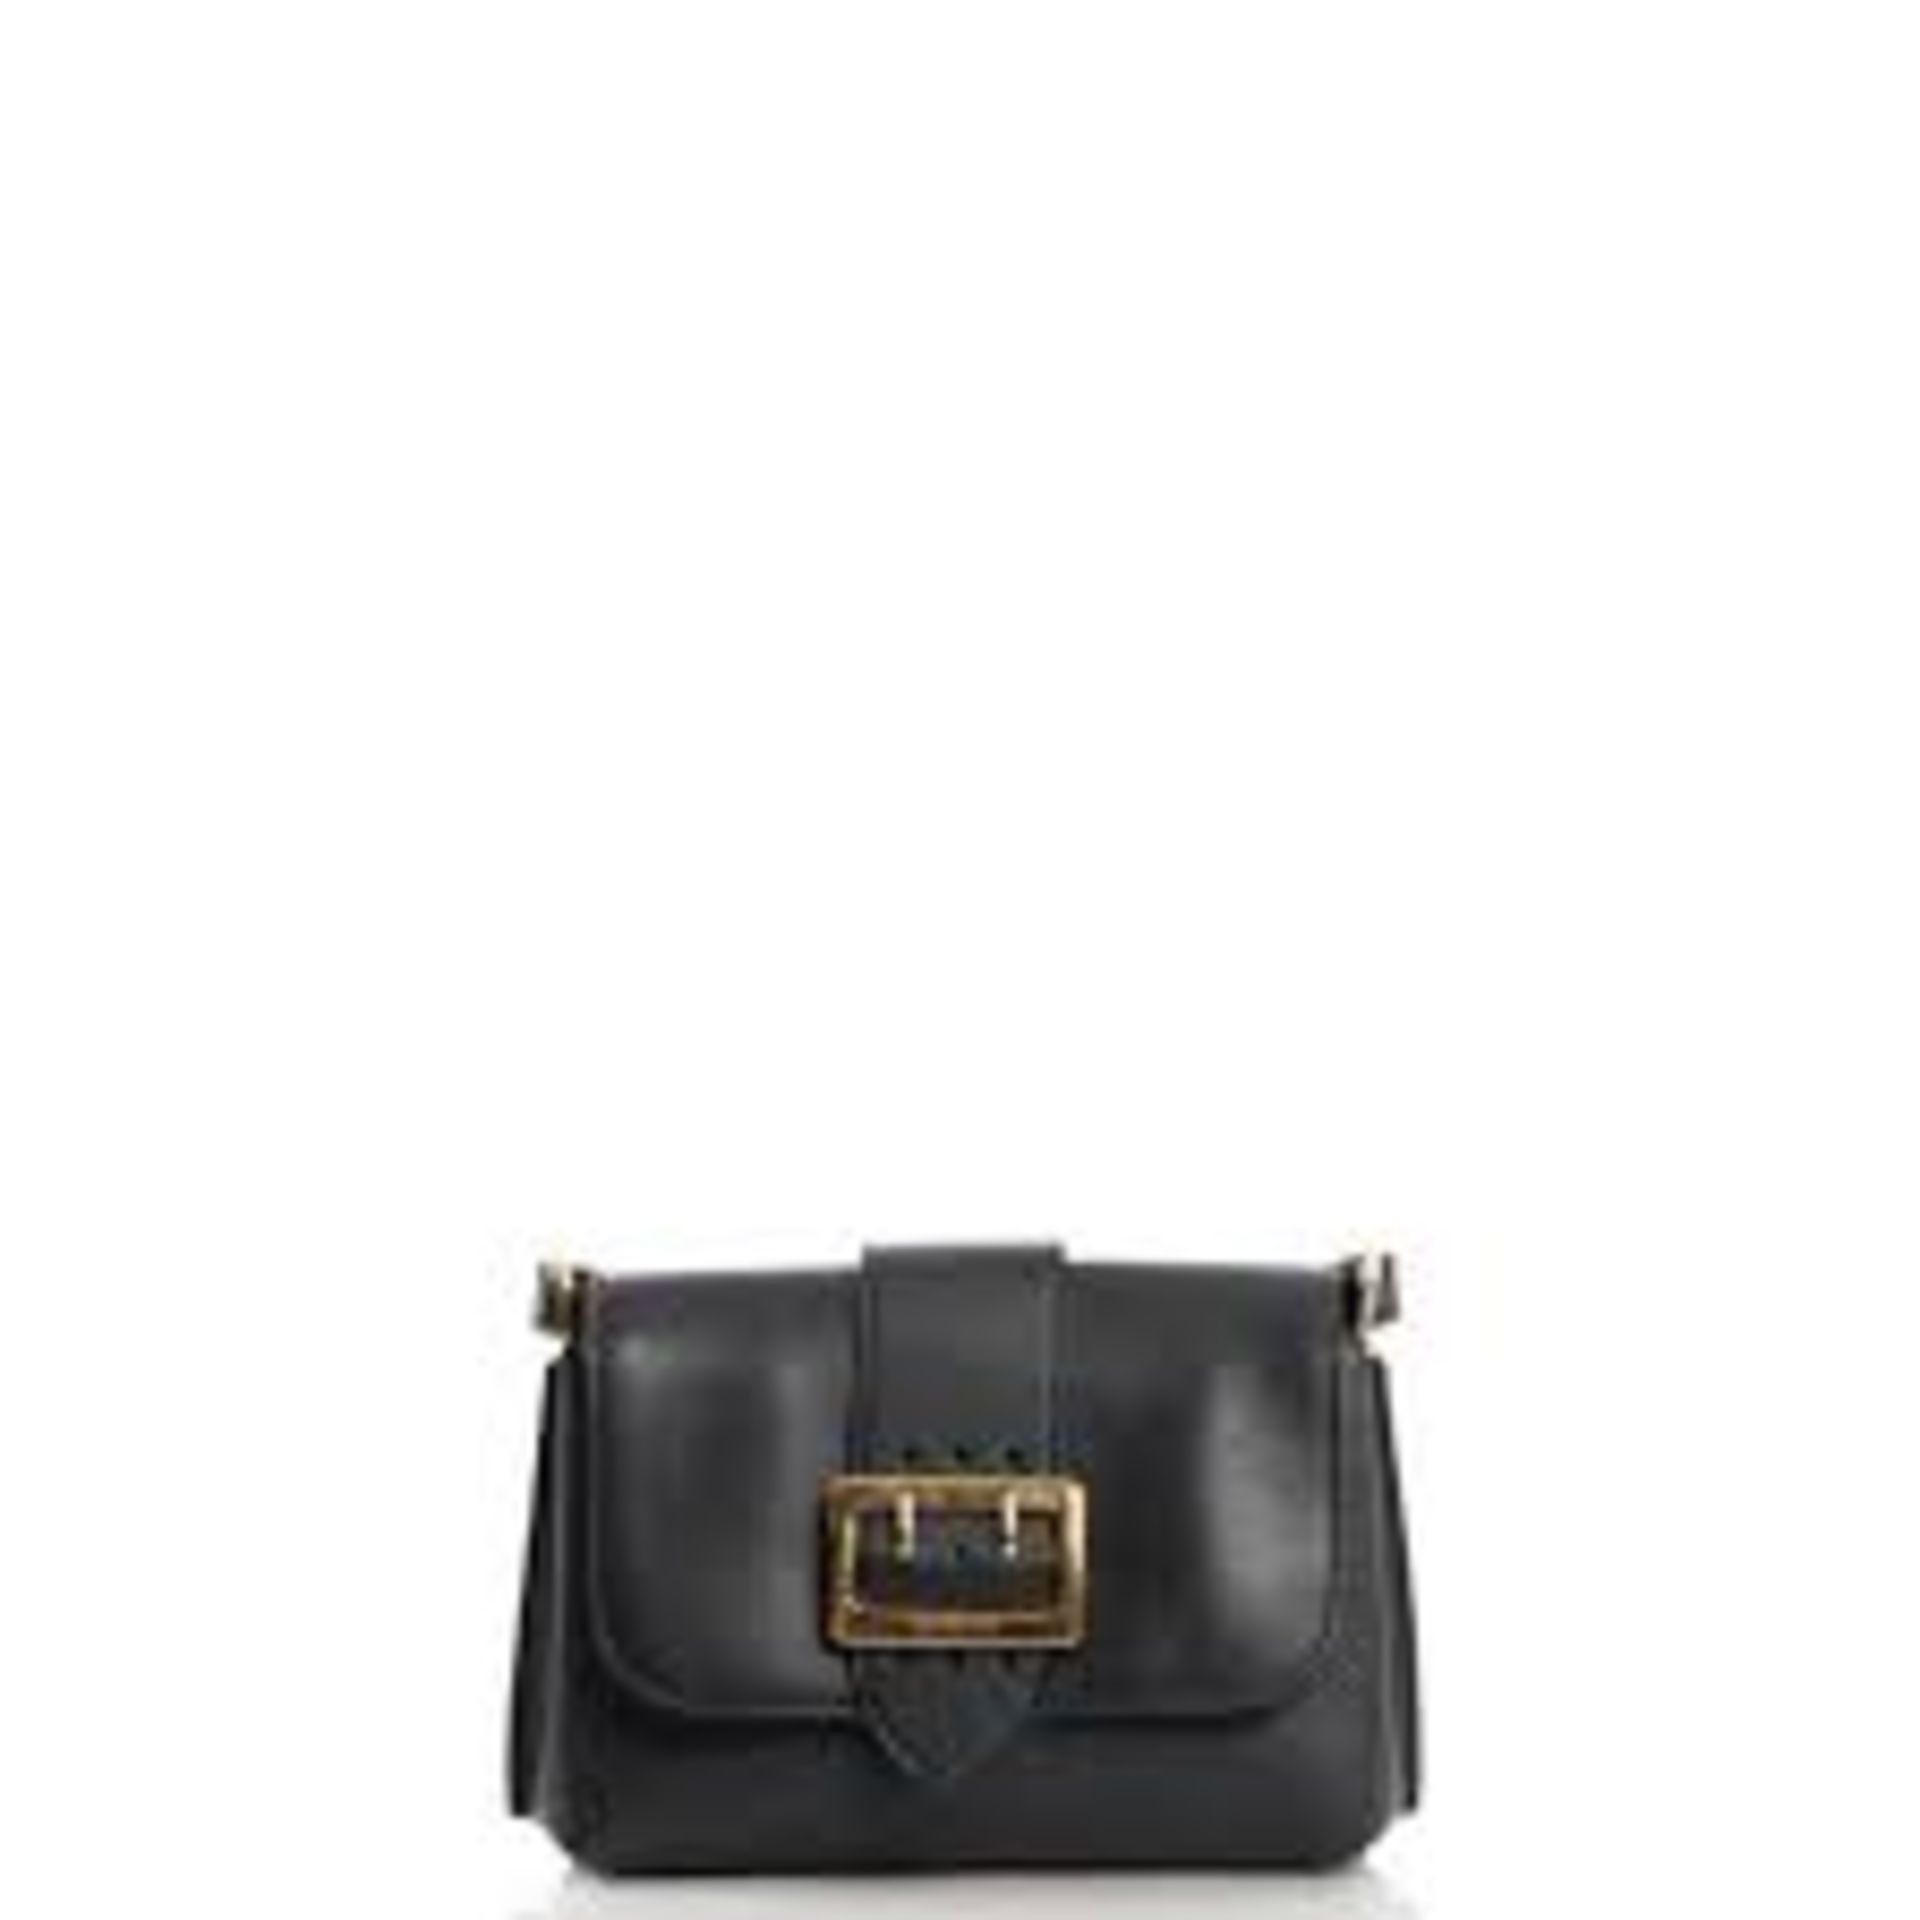 Burberry The Small Leather Buckle Bag in Black 20x18cm.